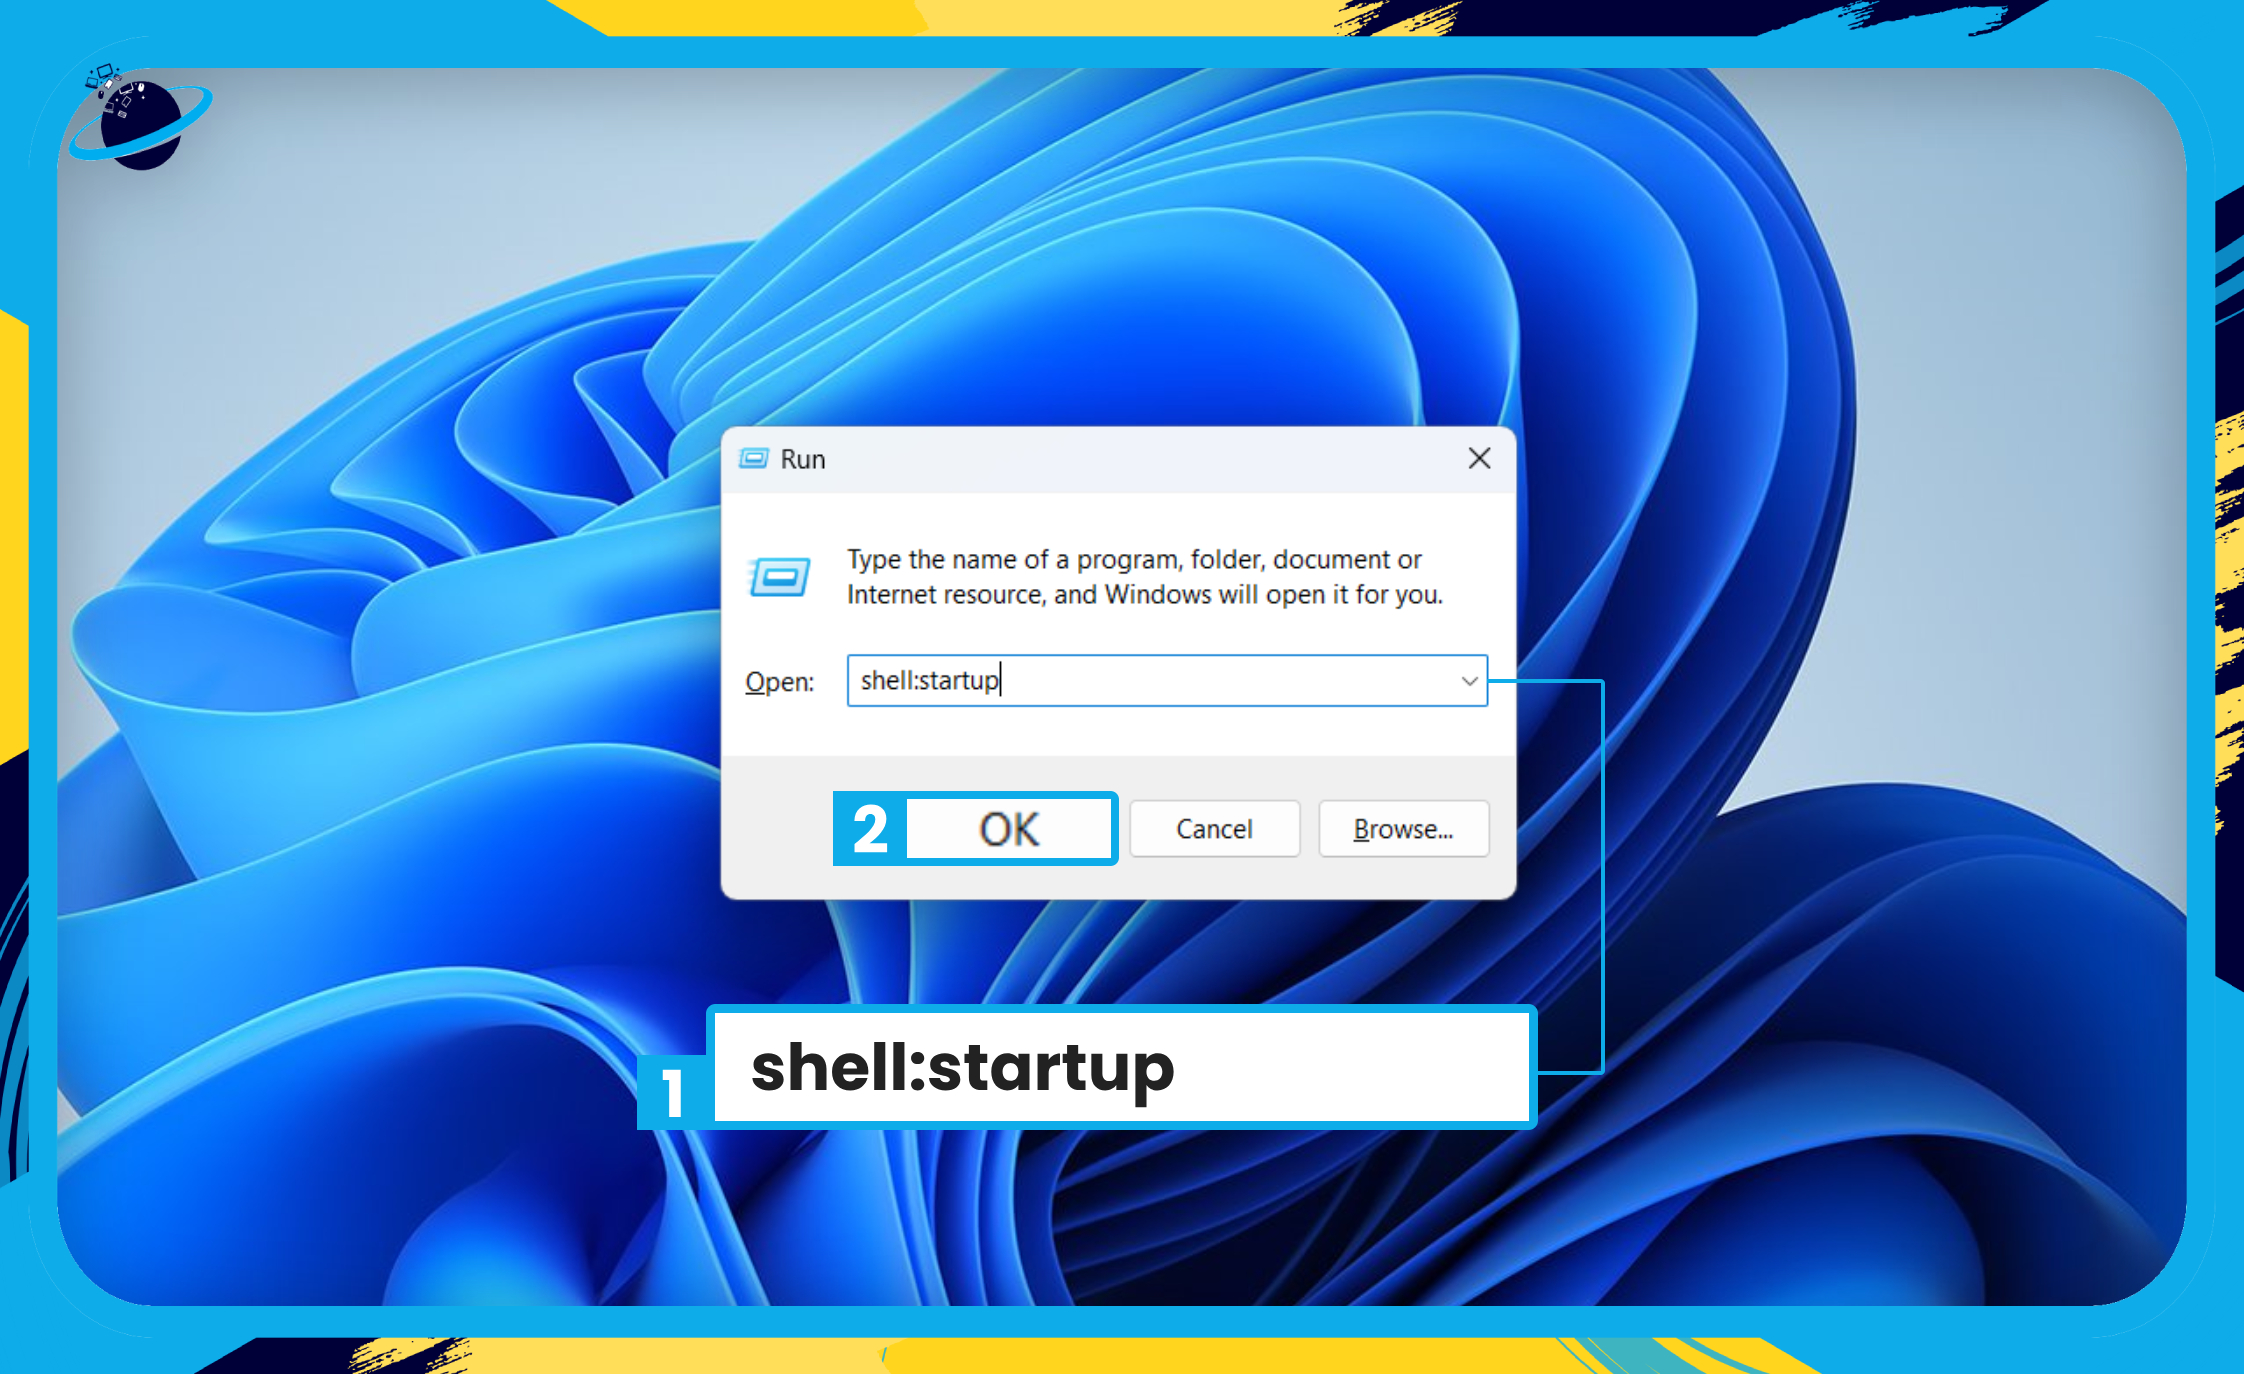 The Run app is open. Here, type "shell:startup" and hit "OK."